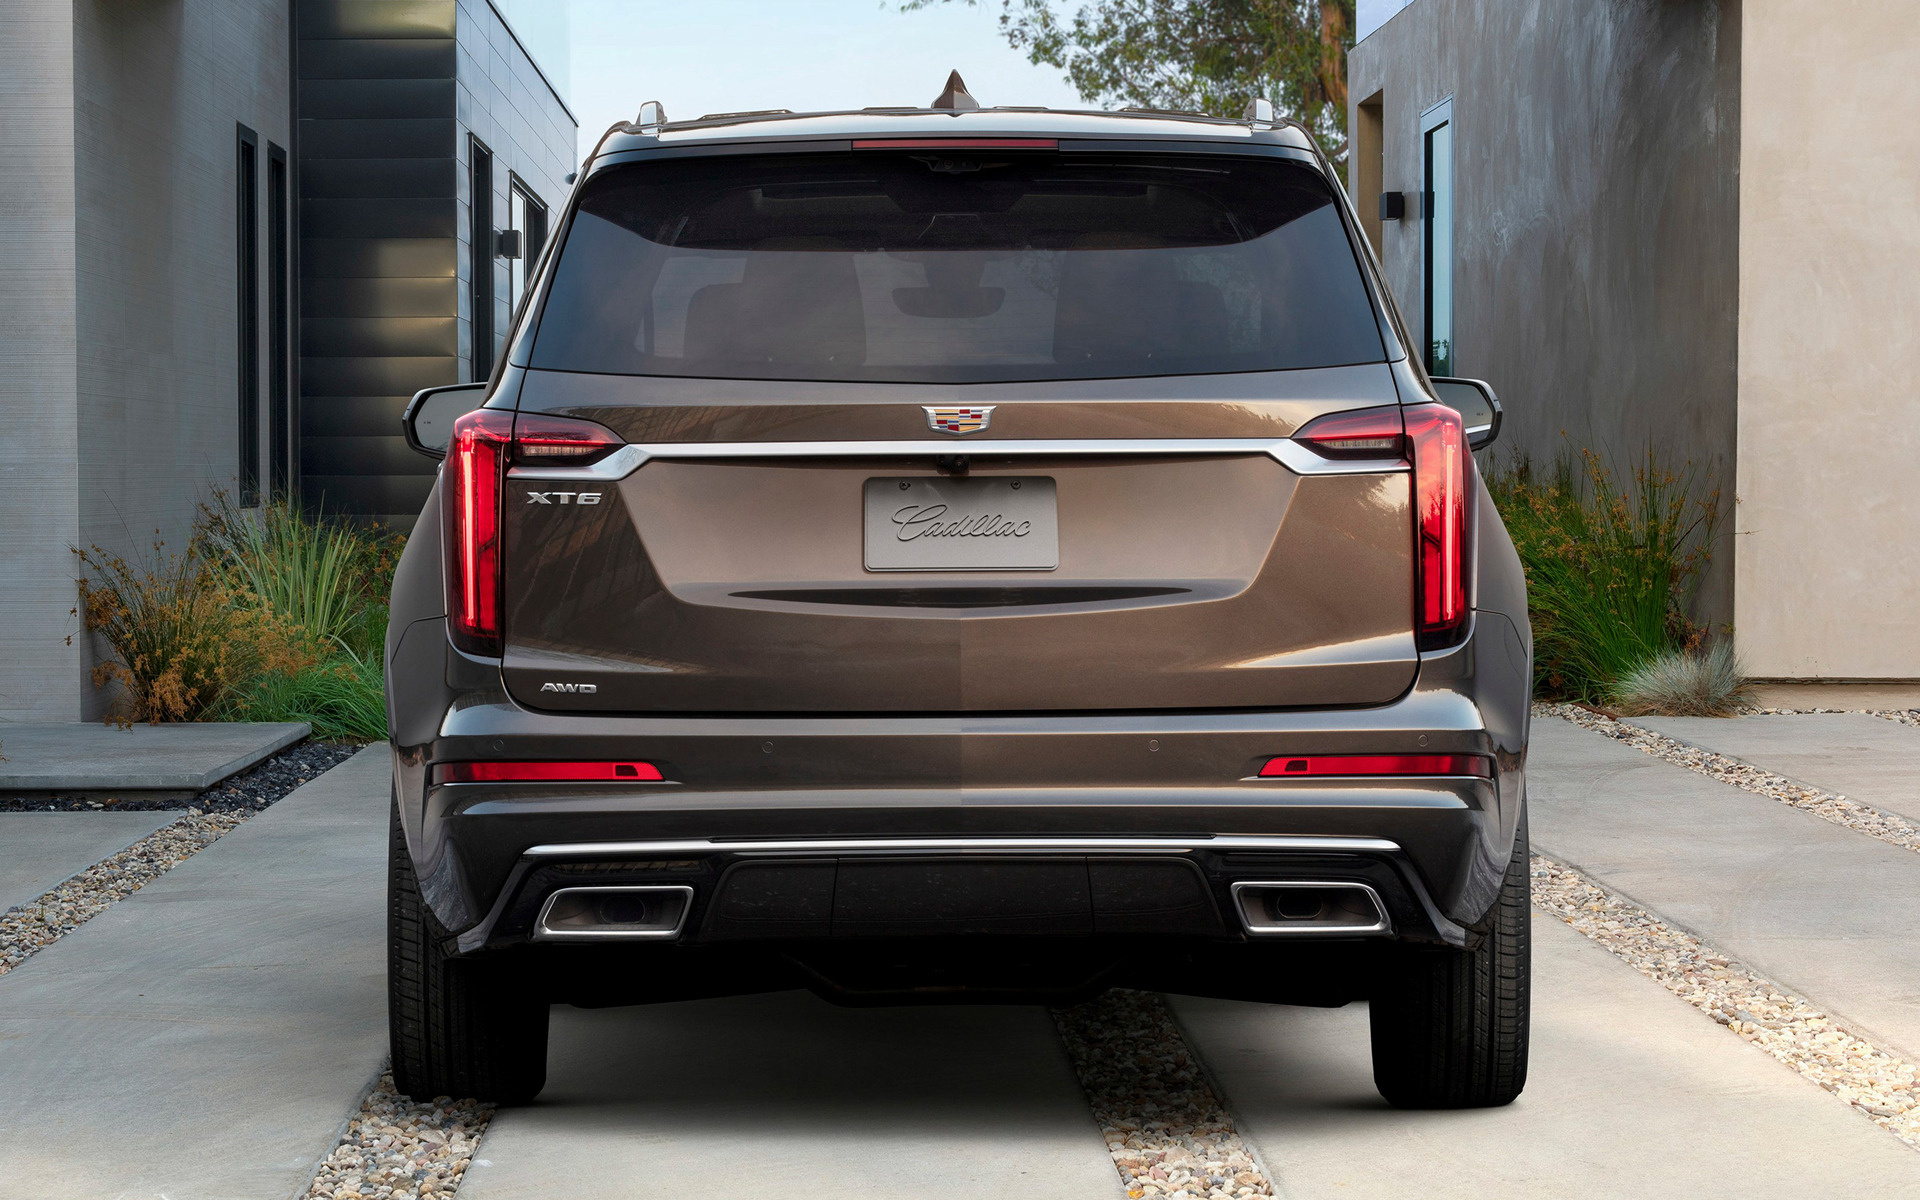 Cadillac XT6 Wallpapers (66+ images inside)